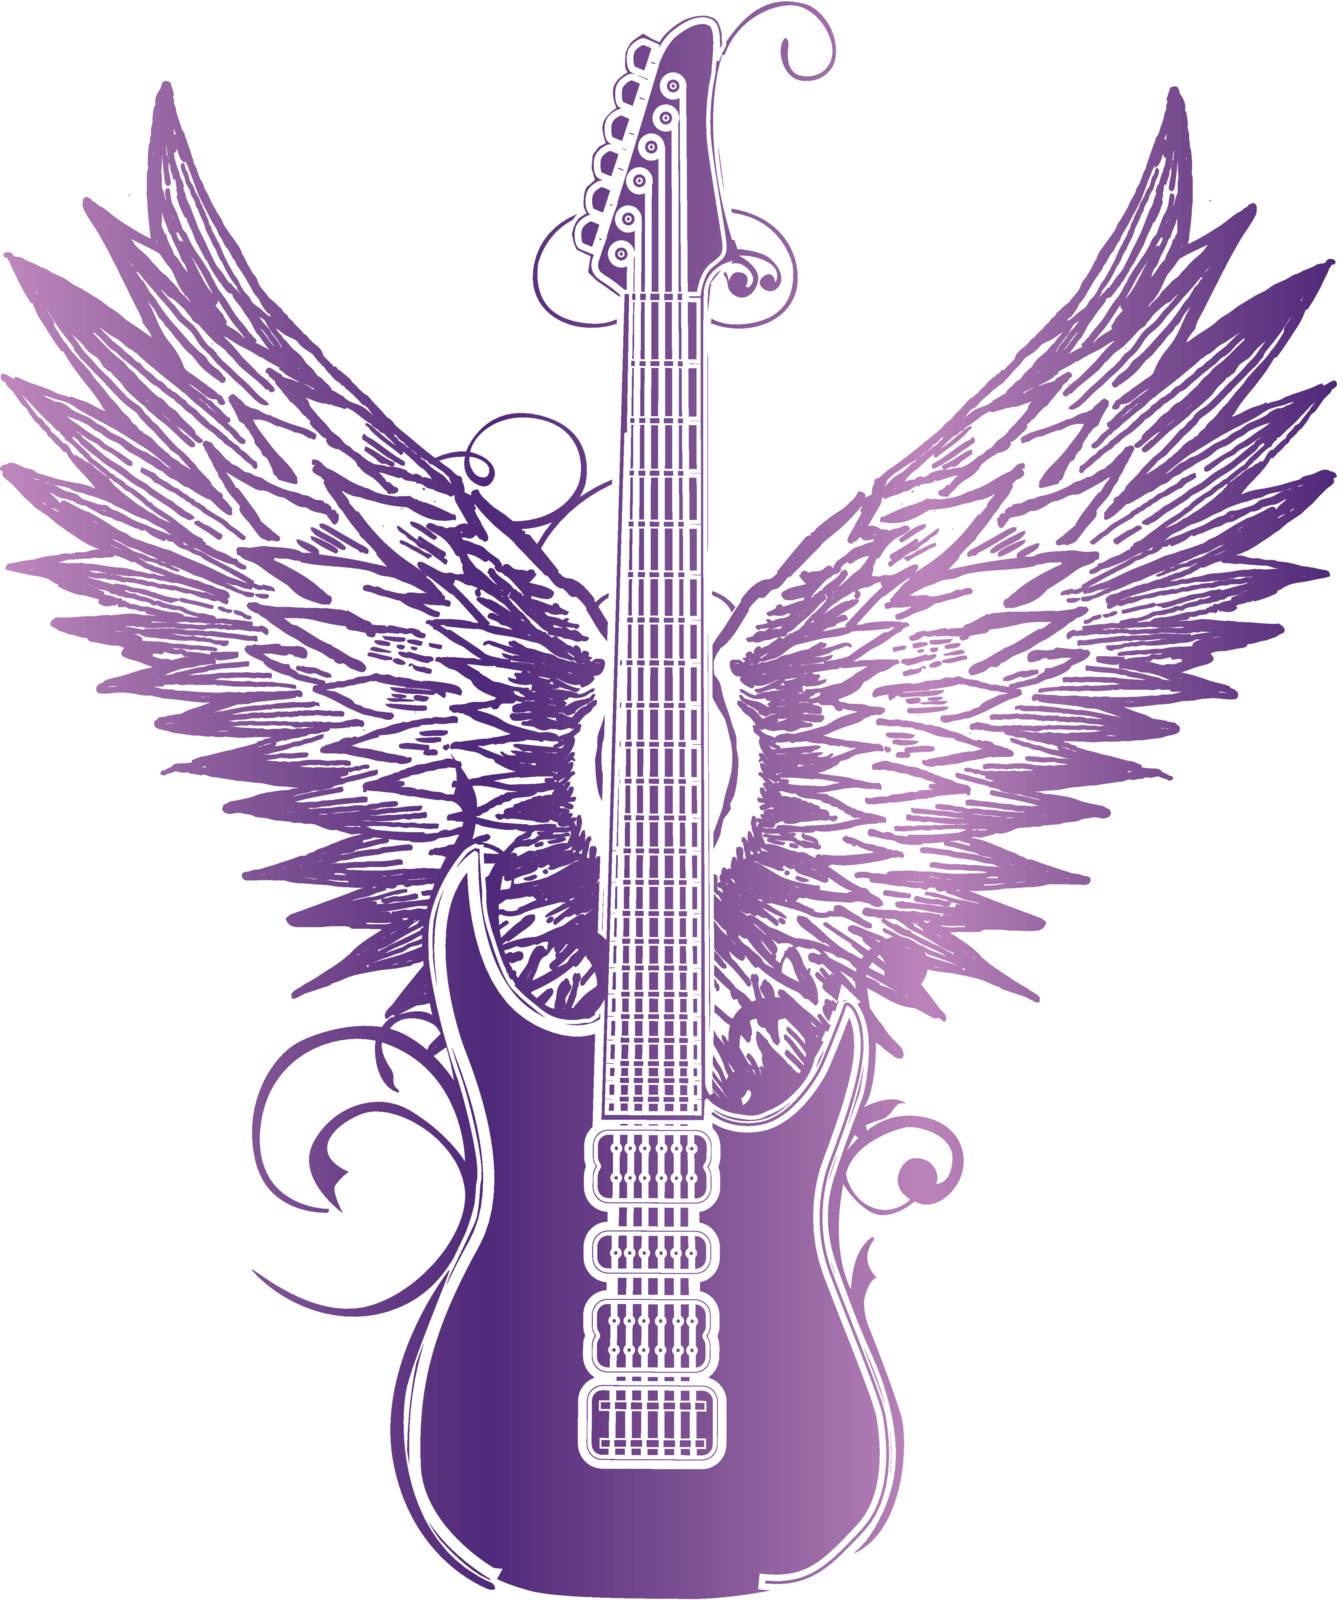 Guitar wing tribal wing by catchmybreath